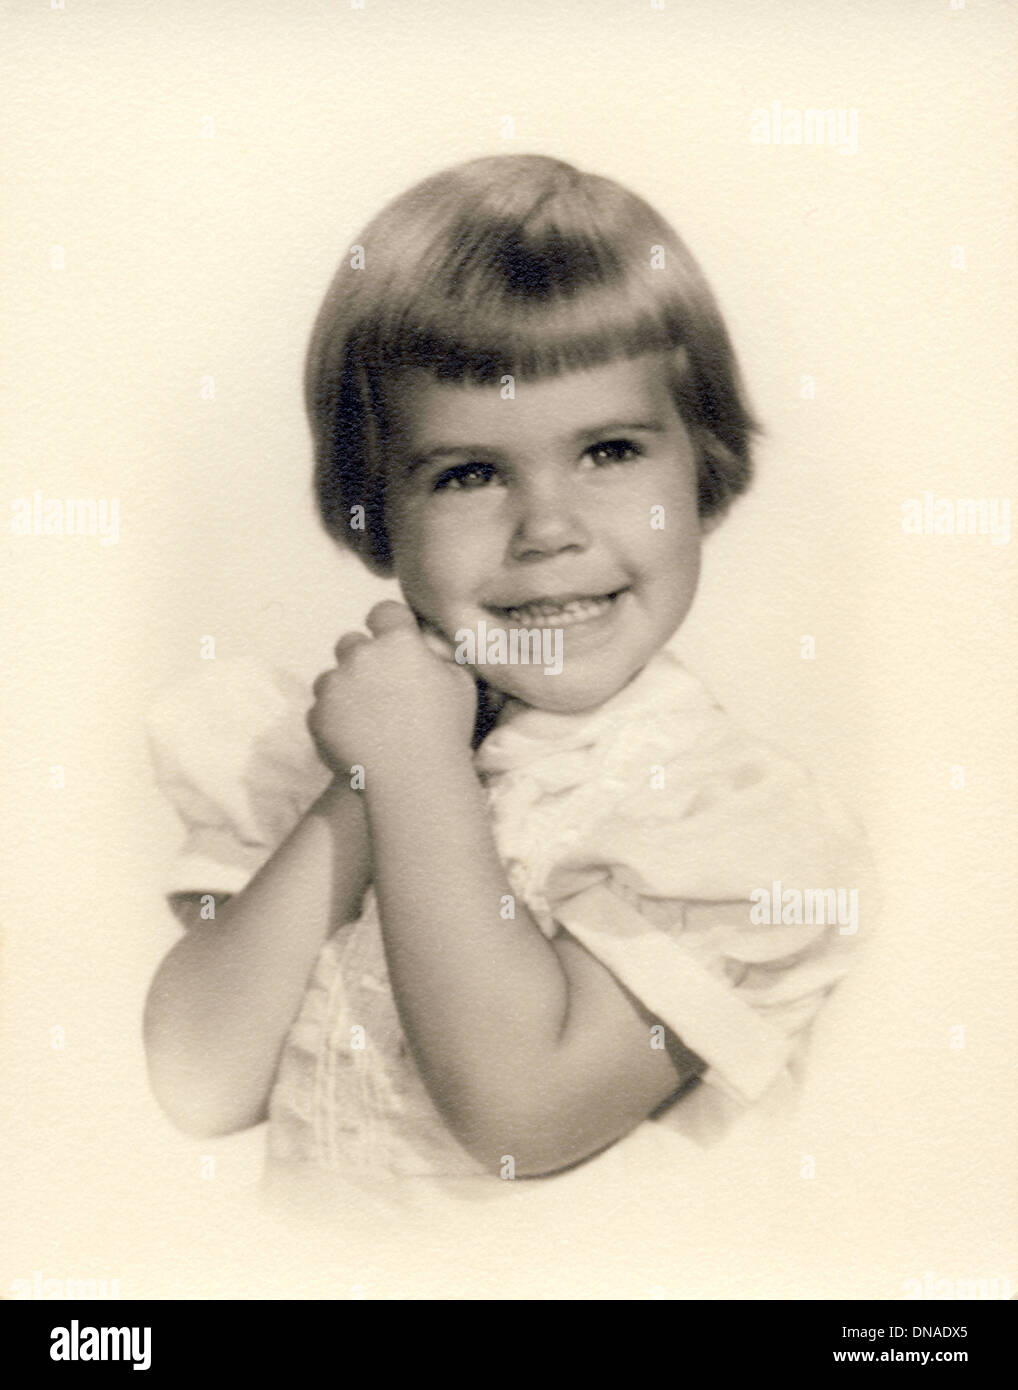 Young Girl, Portrait, 1960's Stock Photo